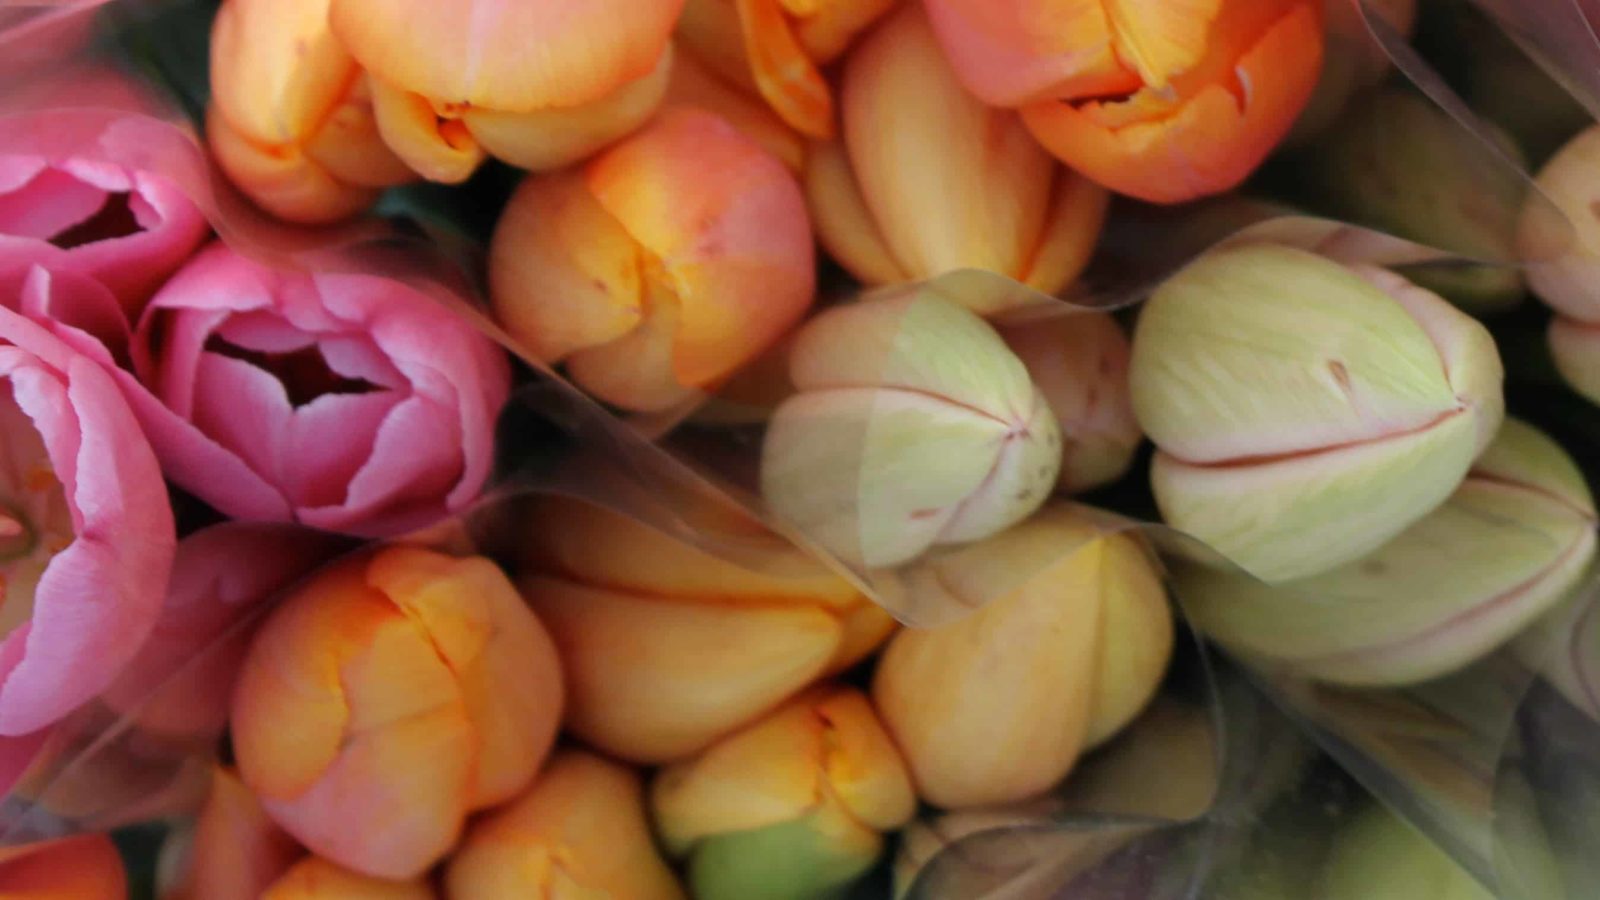 Tulips wait to open at the Lenox Farmers Market.